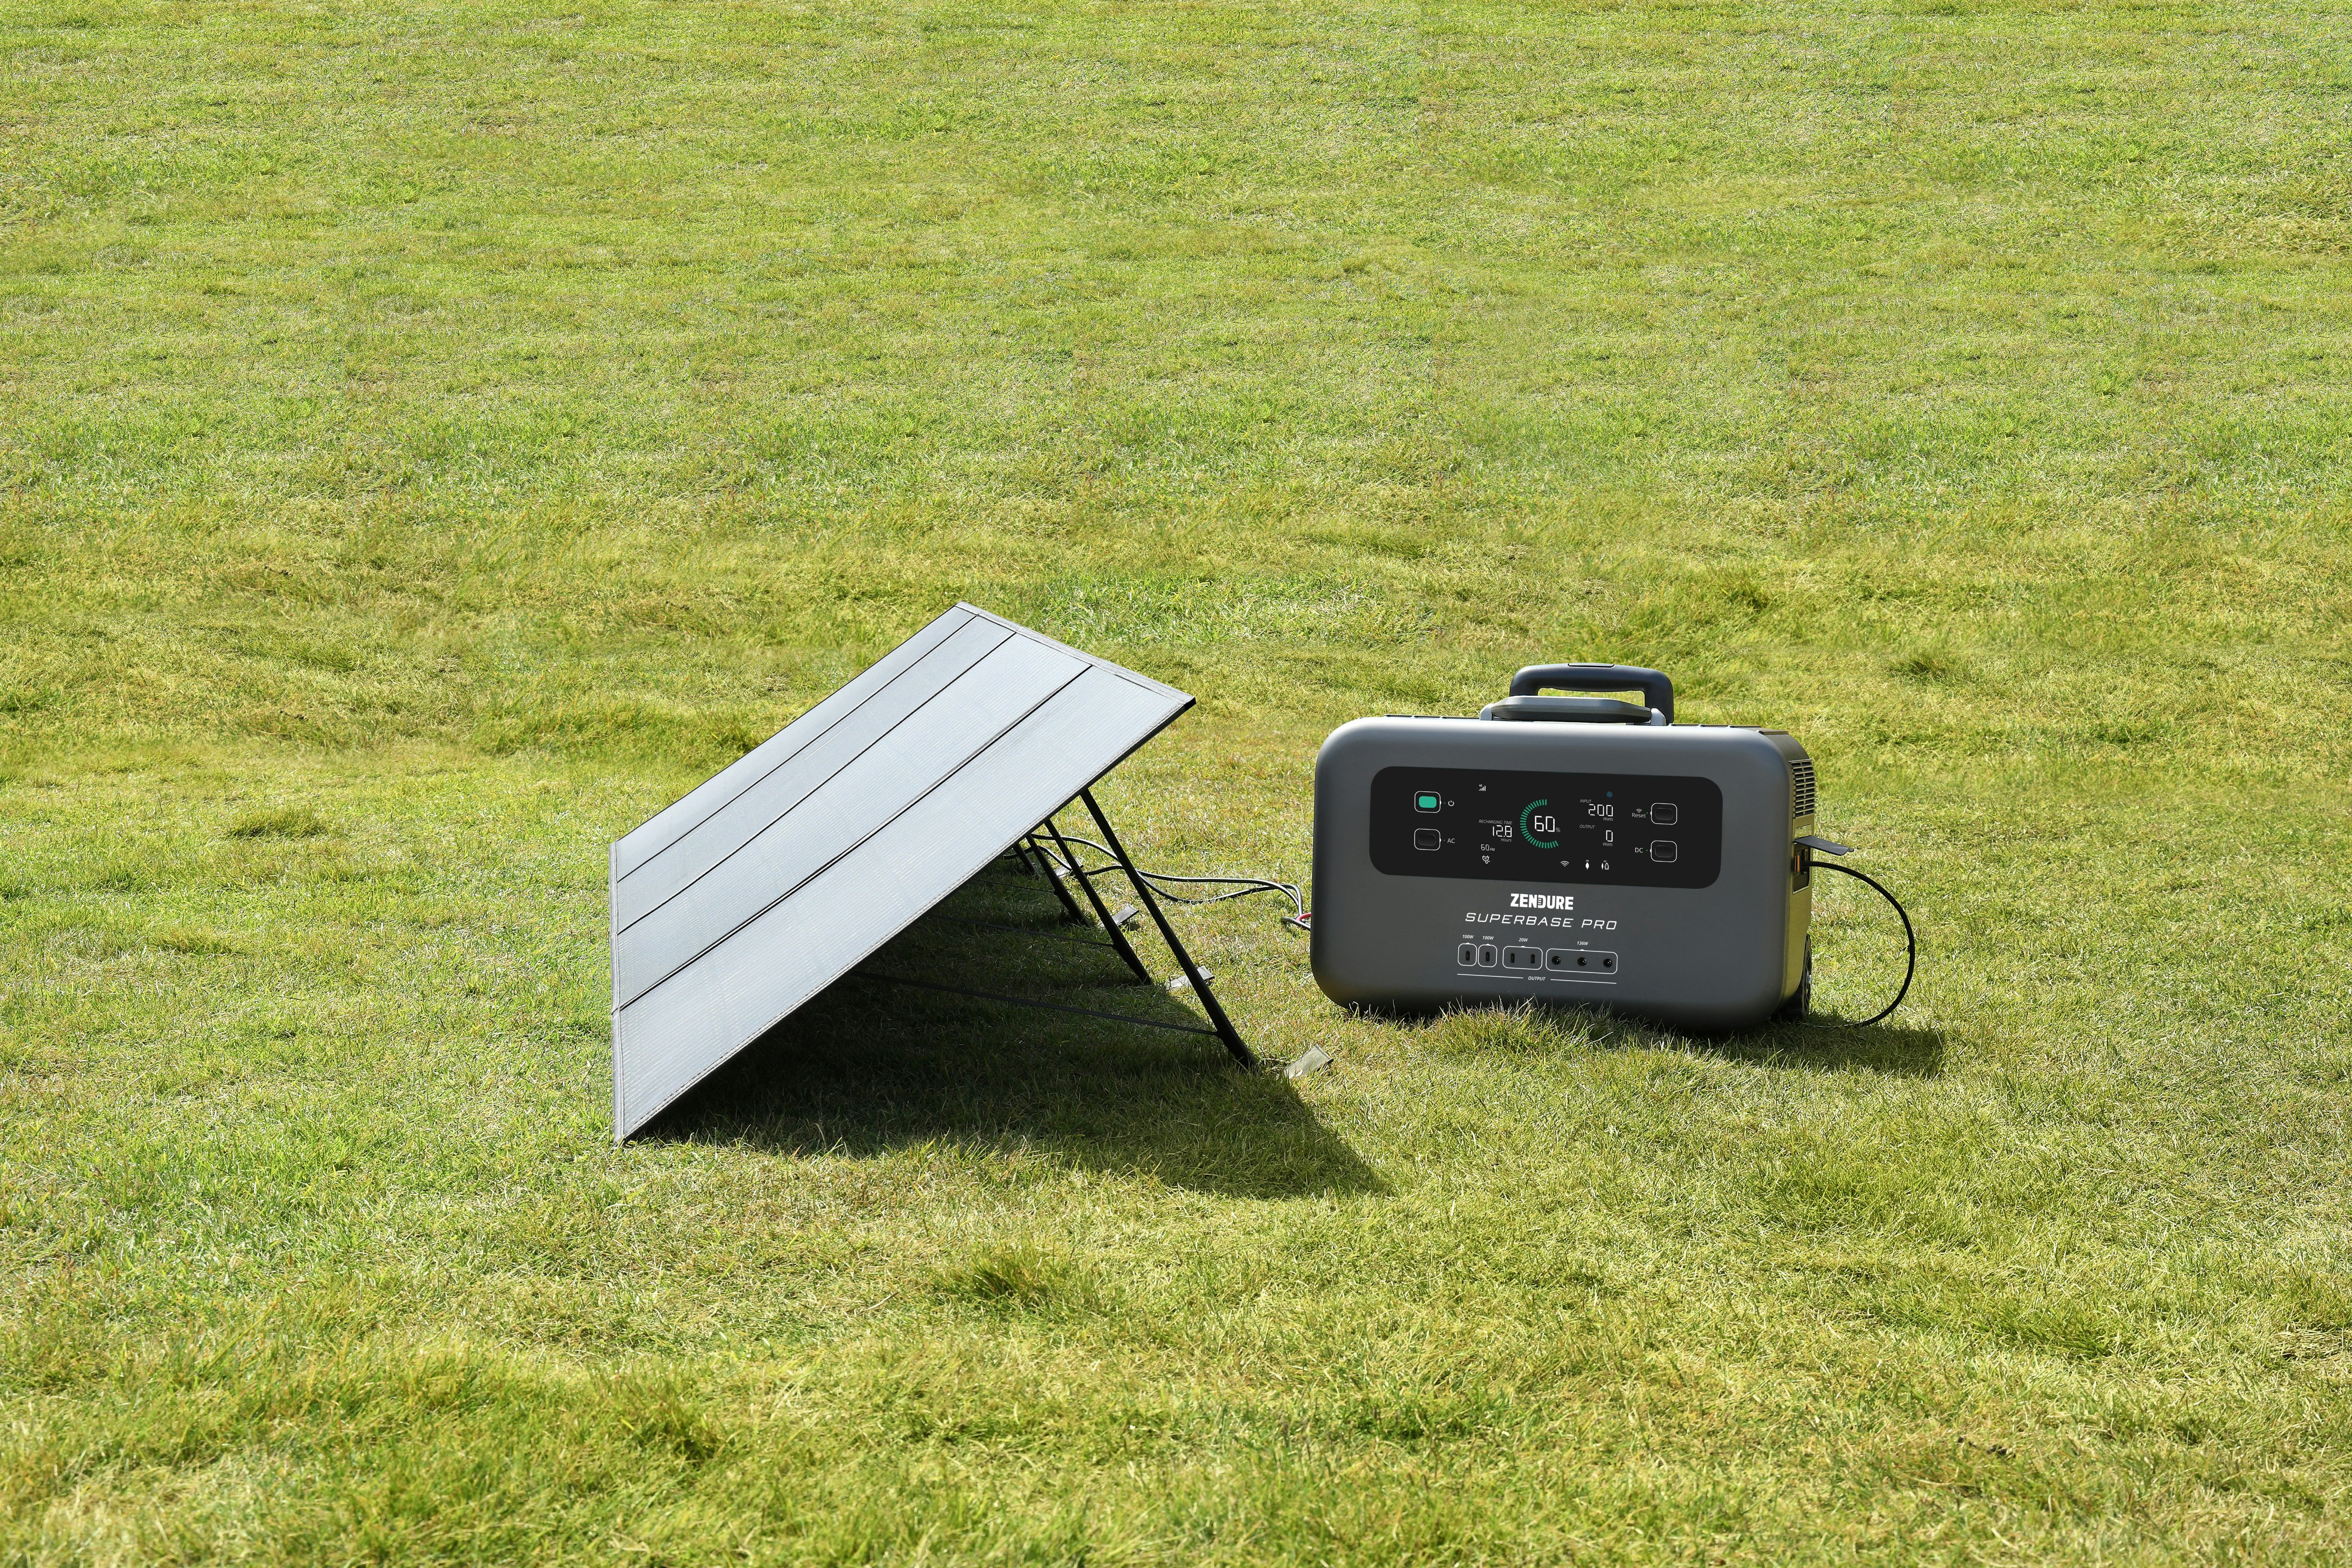 Can You Leave A Solar Generator Plugged In All The Time?